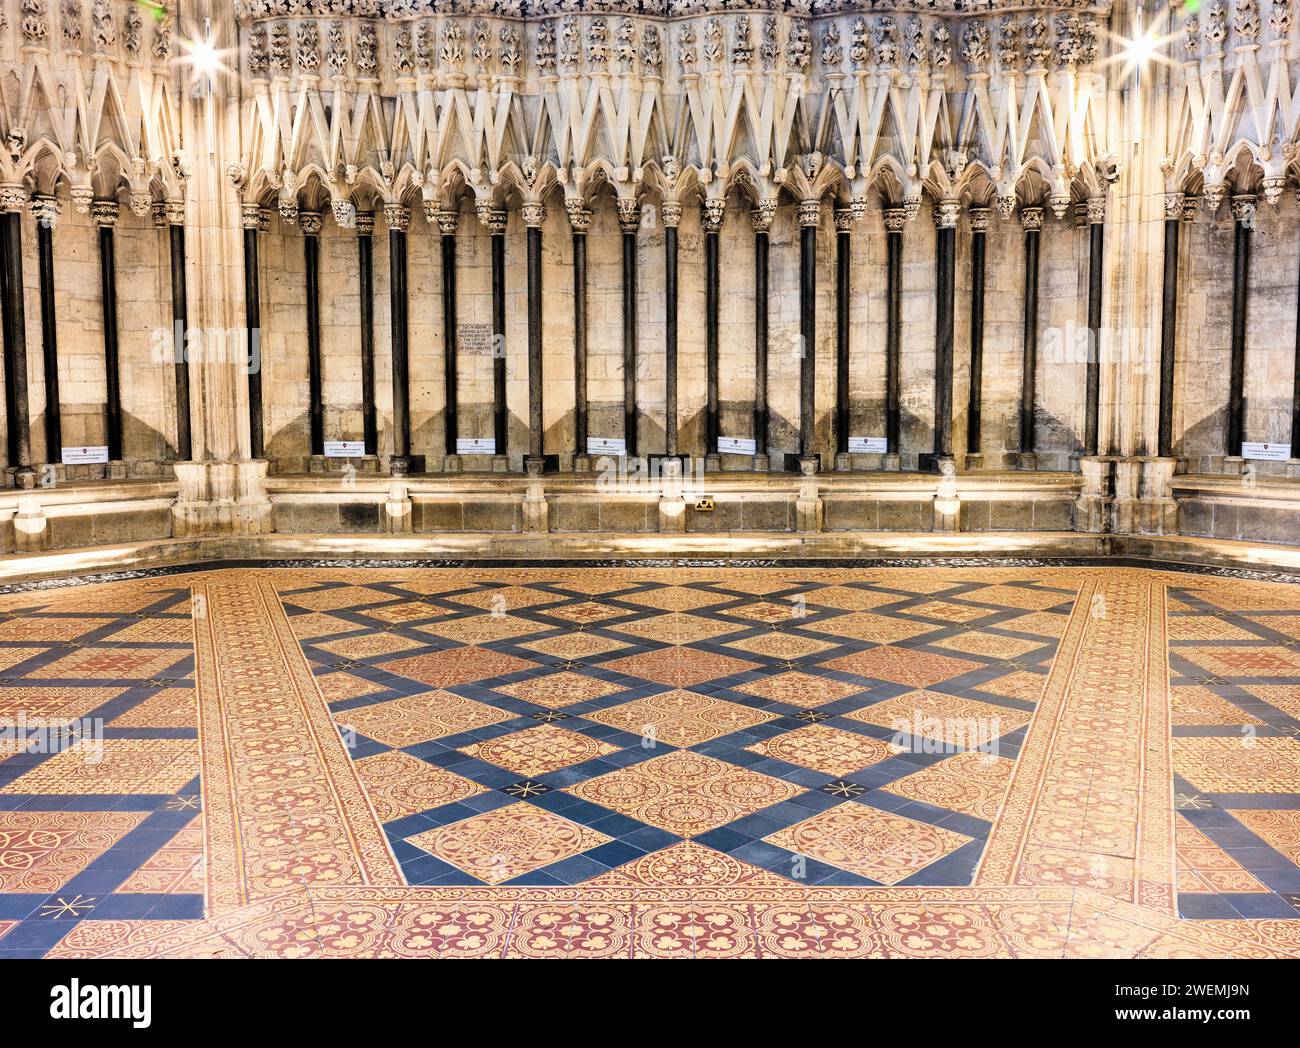 Chapter House at the minster (cathédrale), York, Angleterre. Banque D'Images